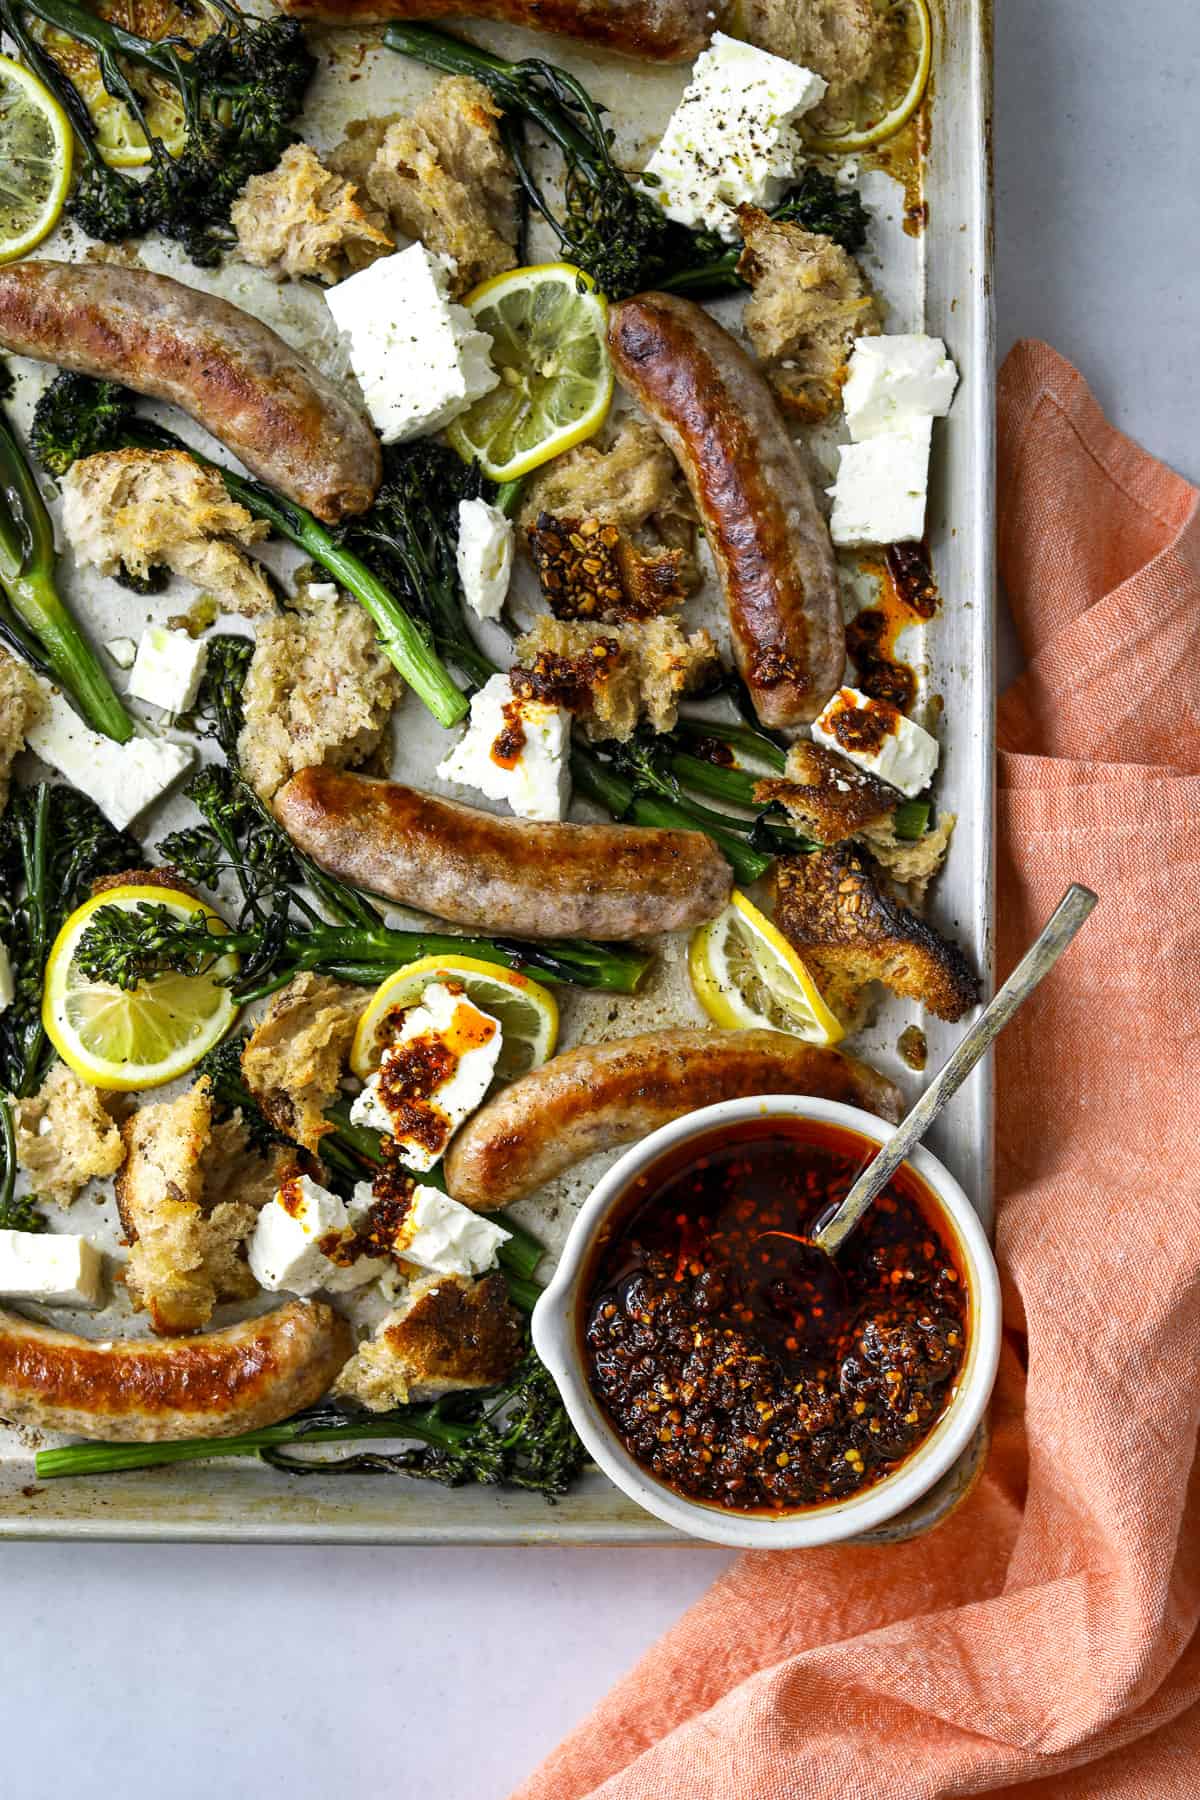 Sheet Pan Roasted Sausage with Broccolini, Feta, and Crunchy Chili Oil